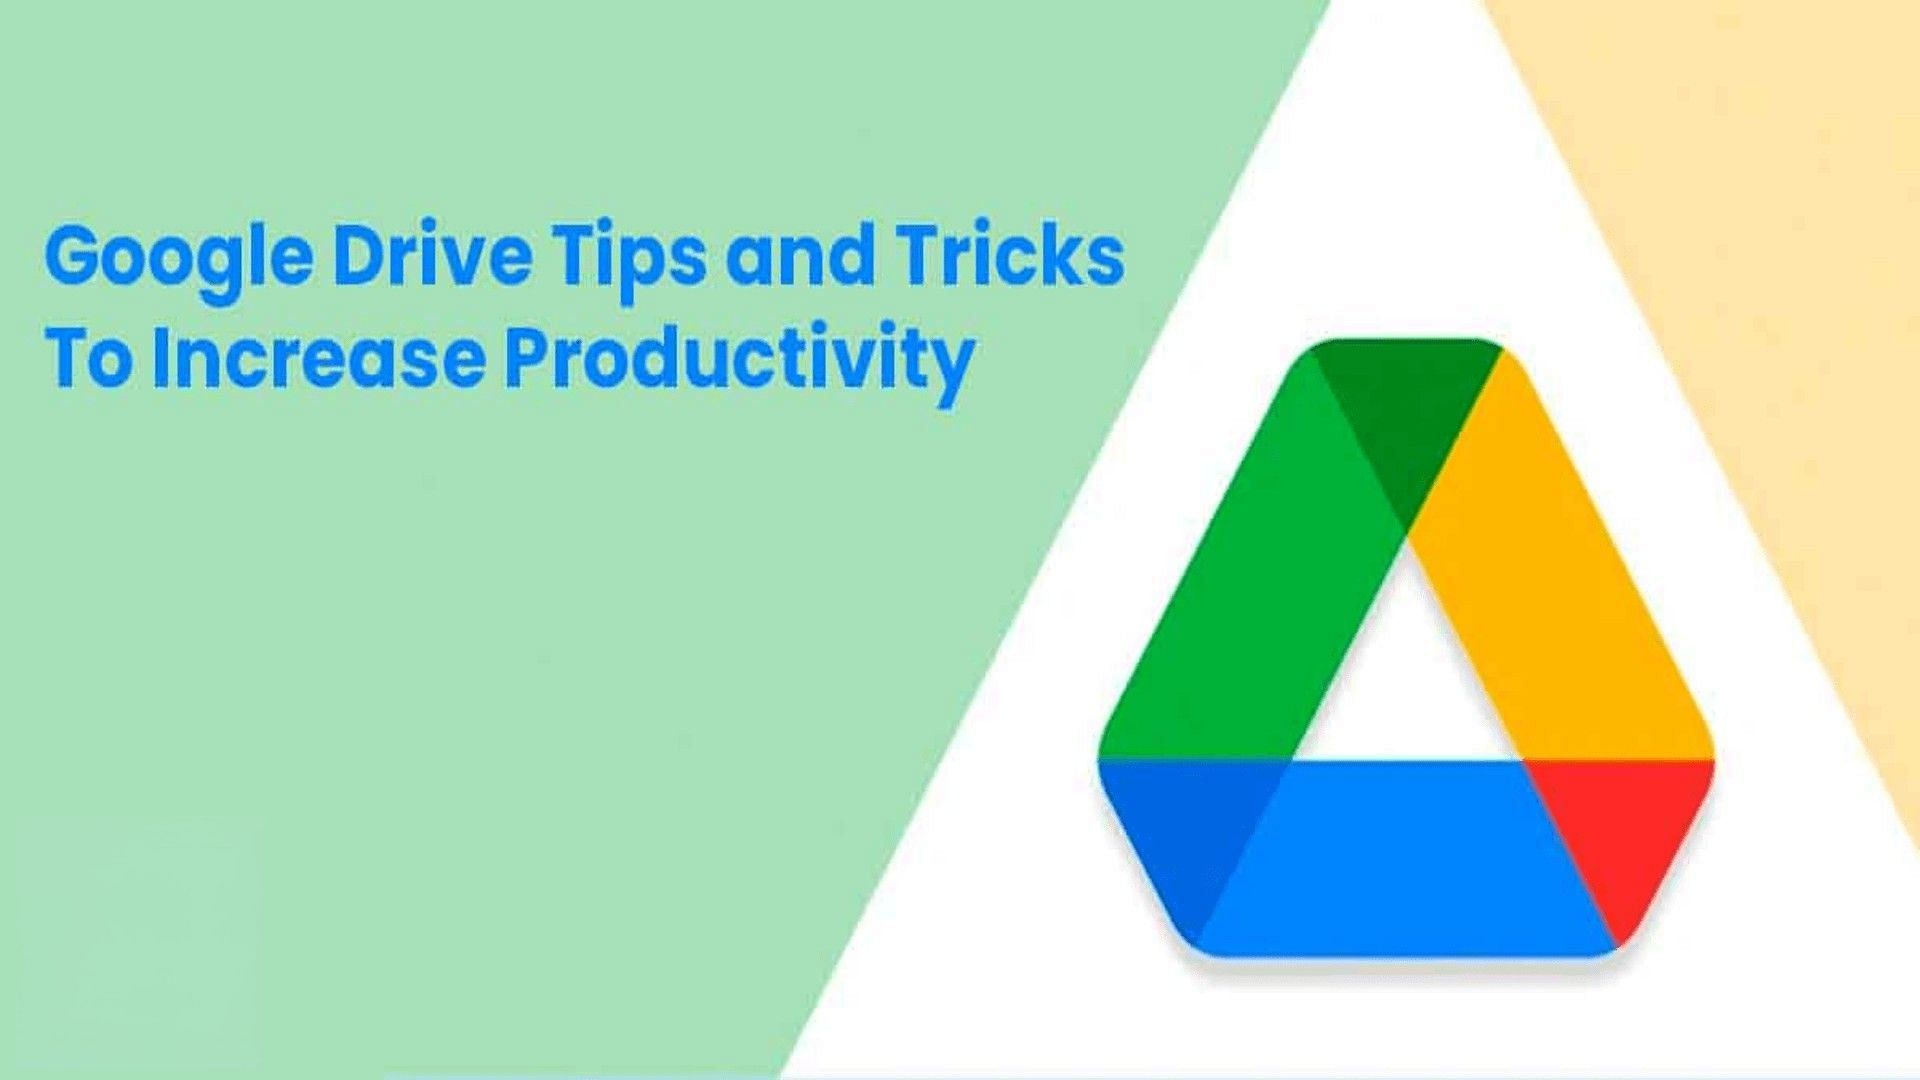 10 best google drive tips and tricks for your daily workflow (Image via Cashify)